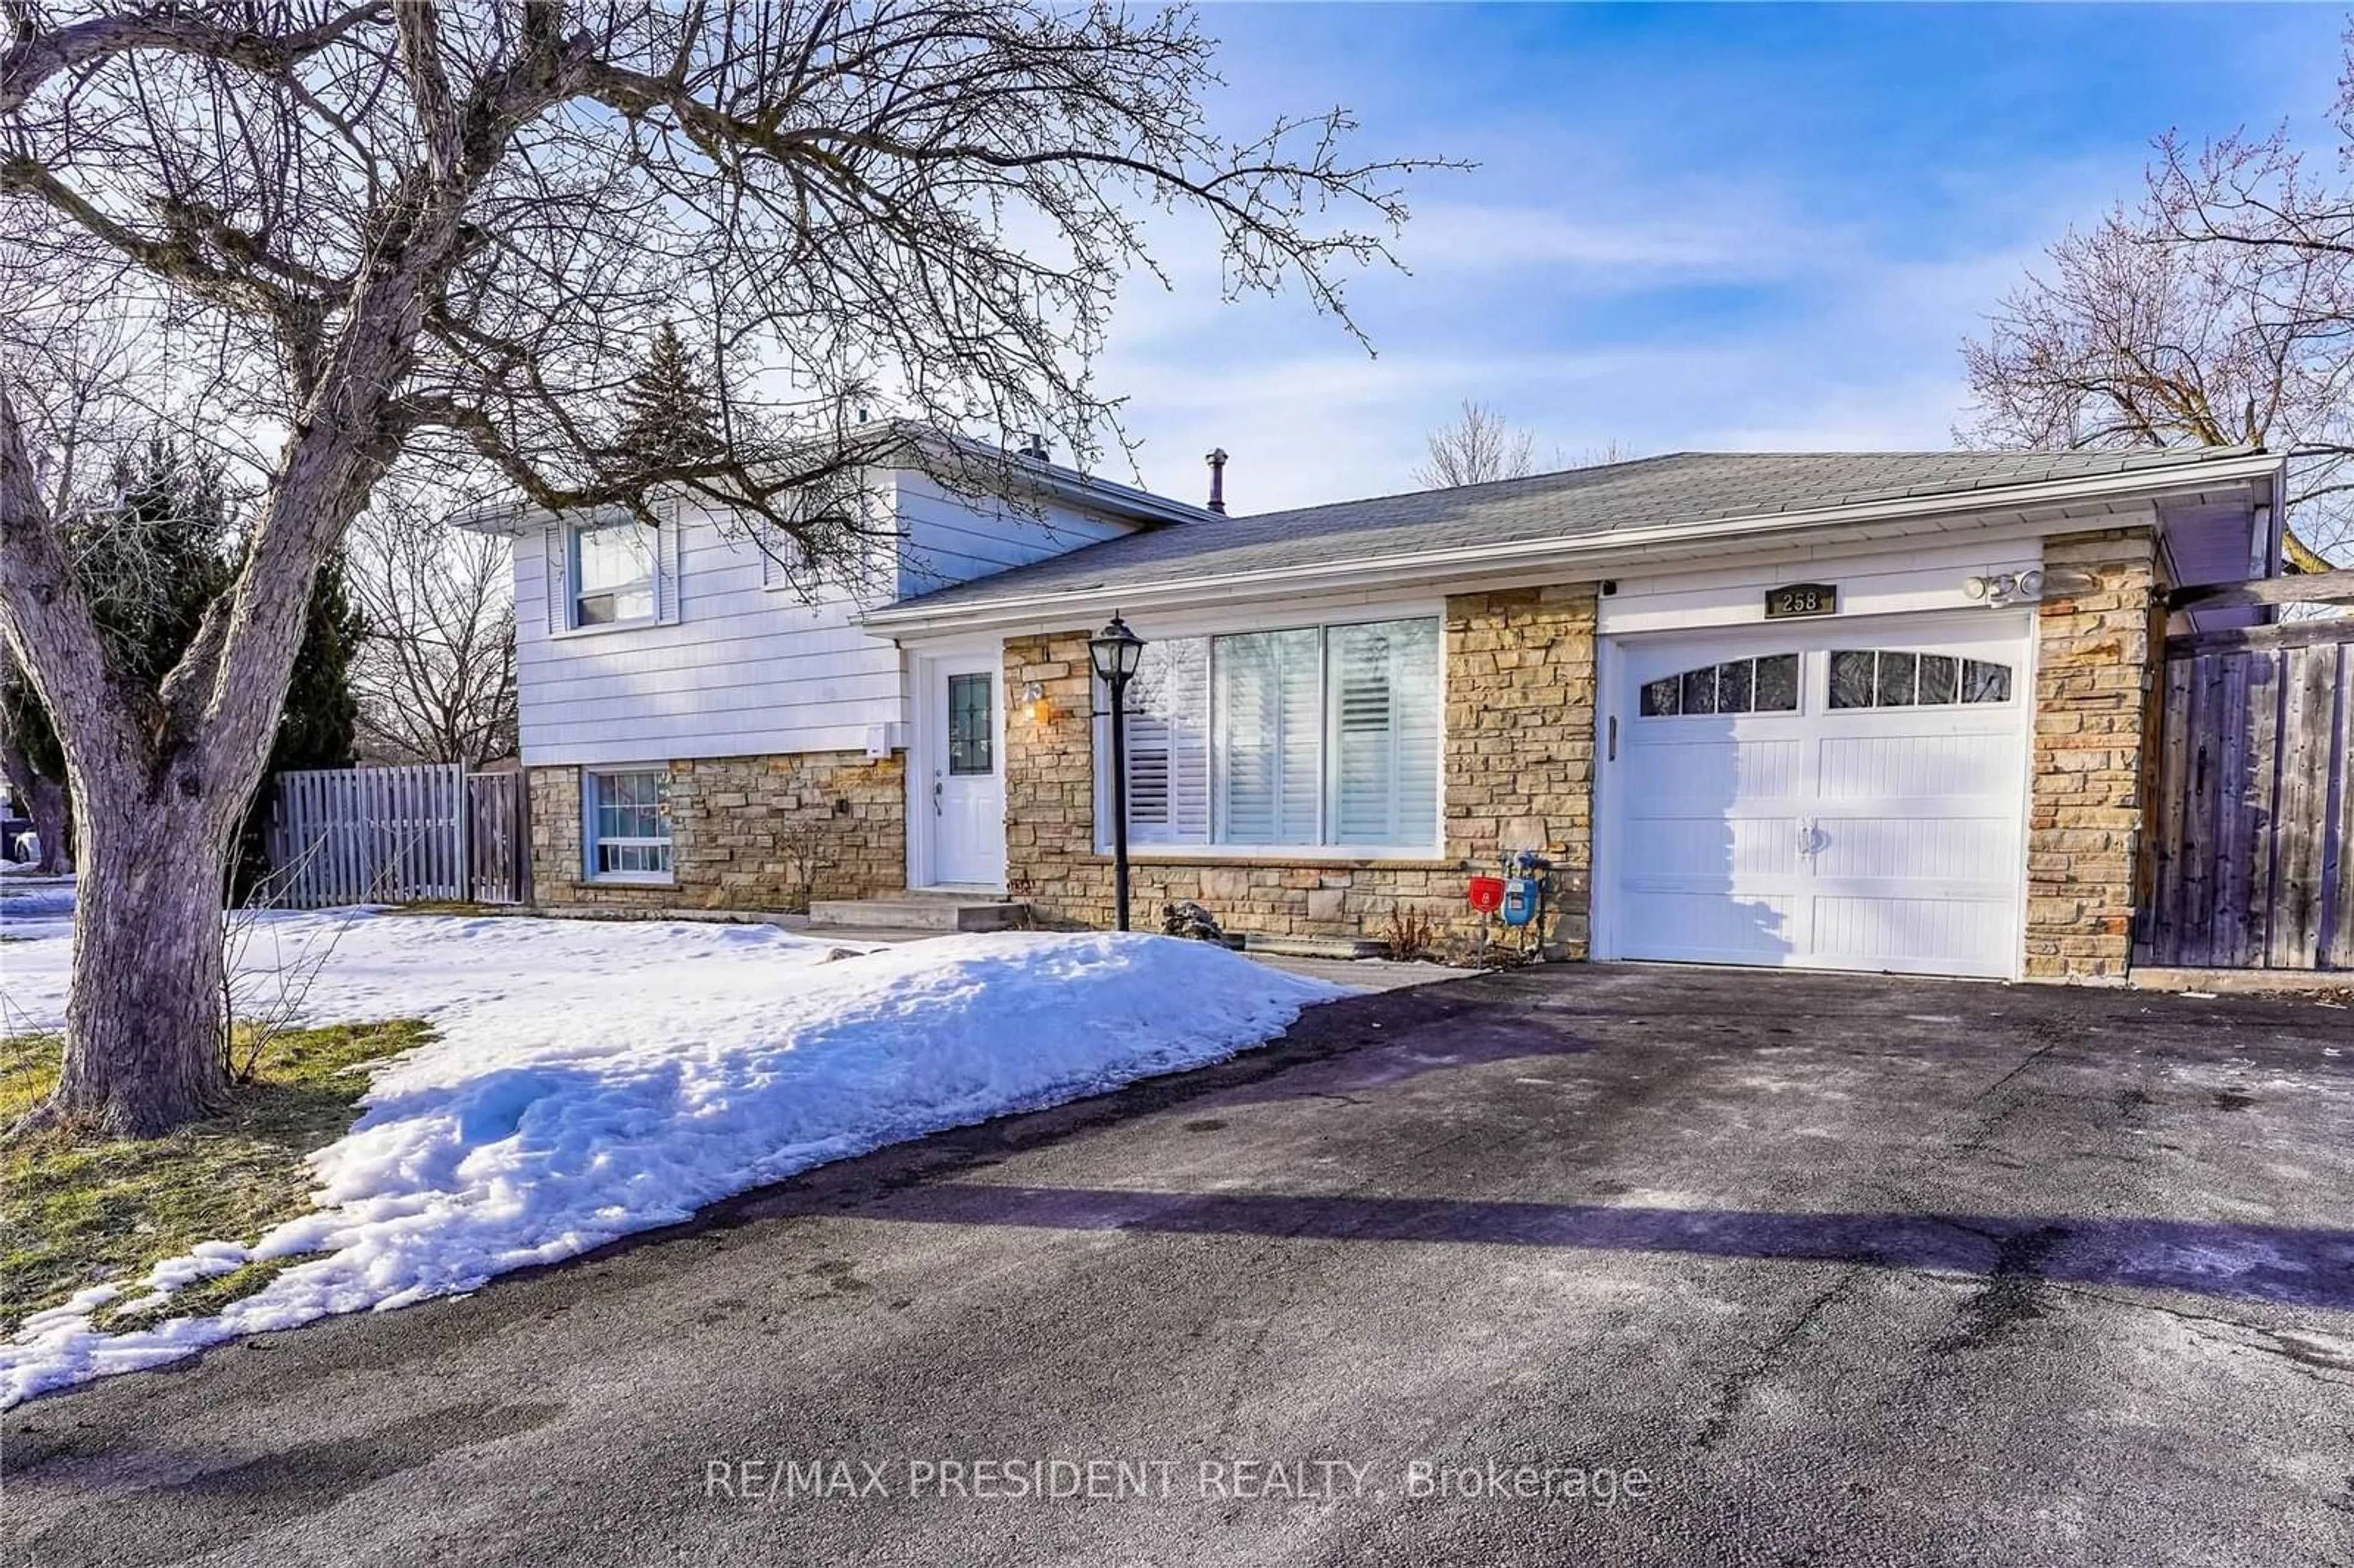 Frontside or backside of a home for 258 Bartley Bull Pkwy, Brampton Ontario L6W 2L3